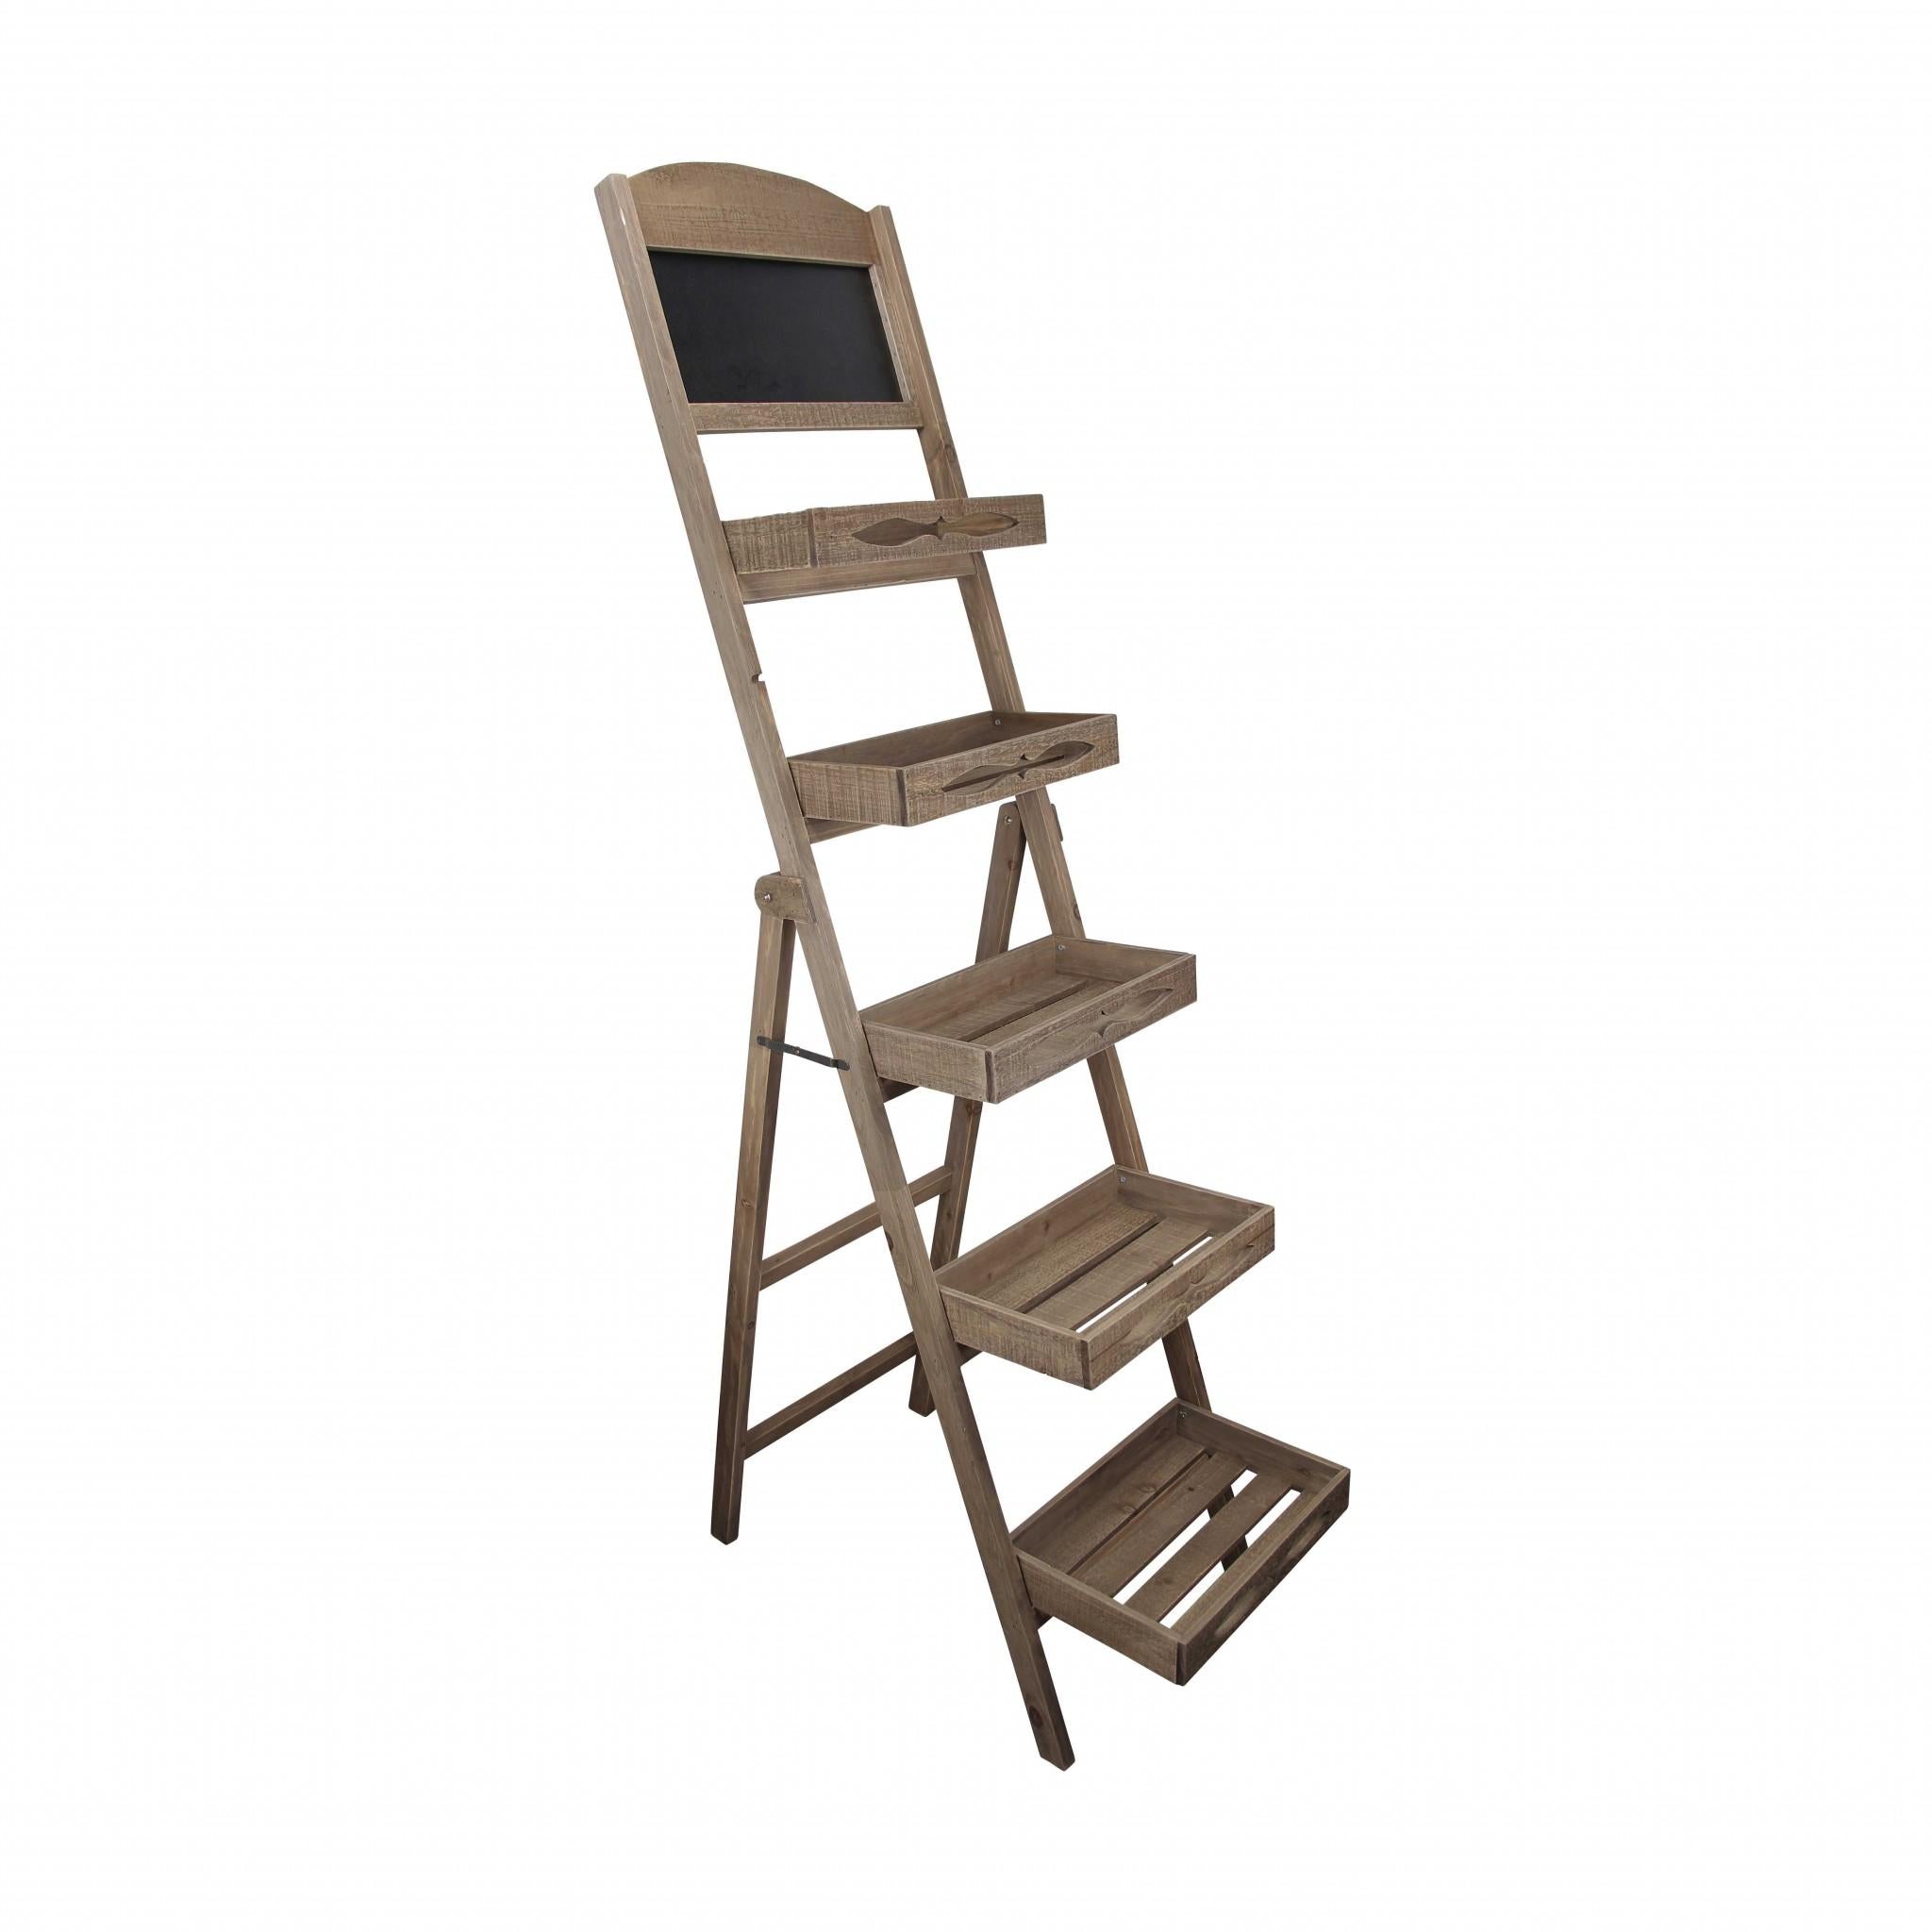 Rustic 5 Tier Ladder Shelving Unit with Chalkboard